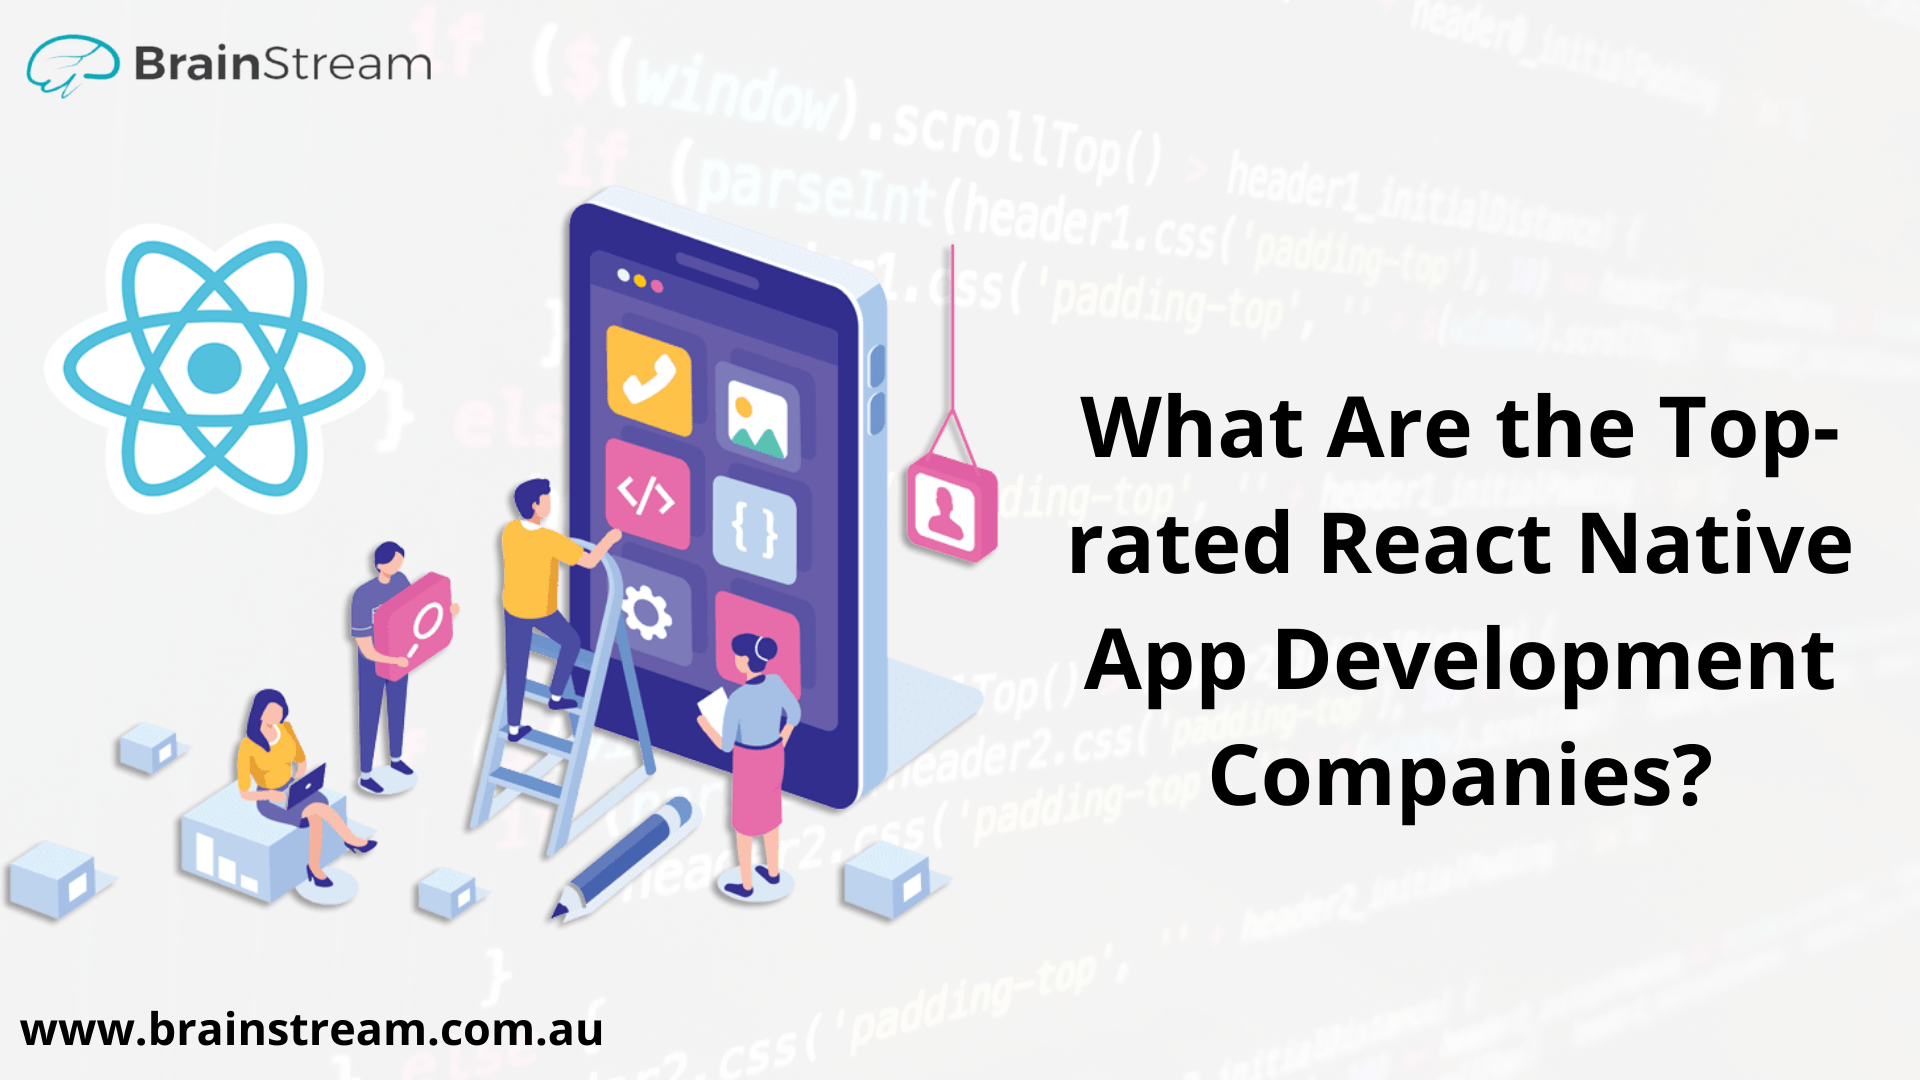 What Are the Top-rated React Native App Development Companies?